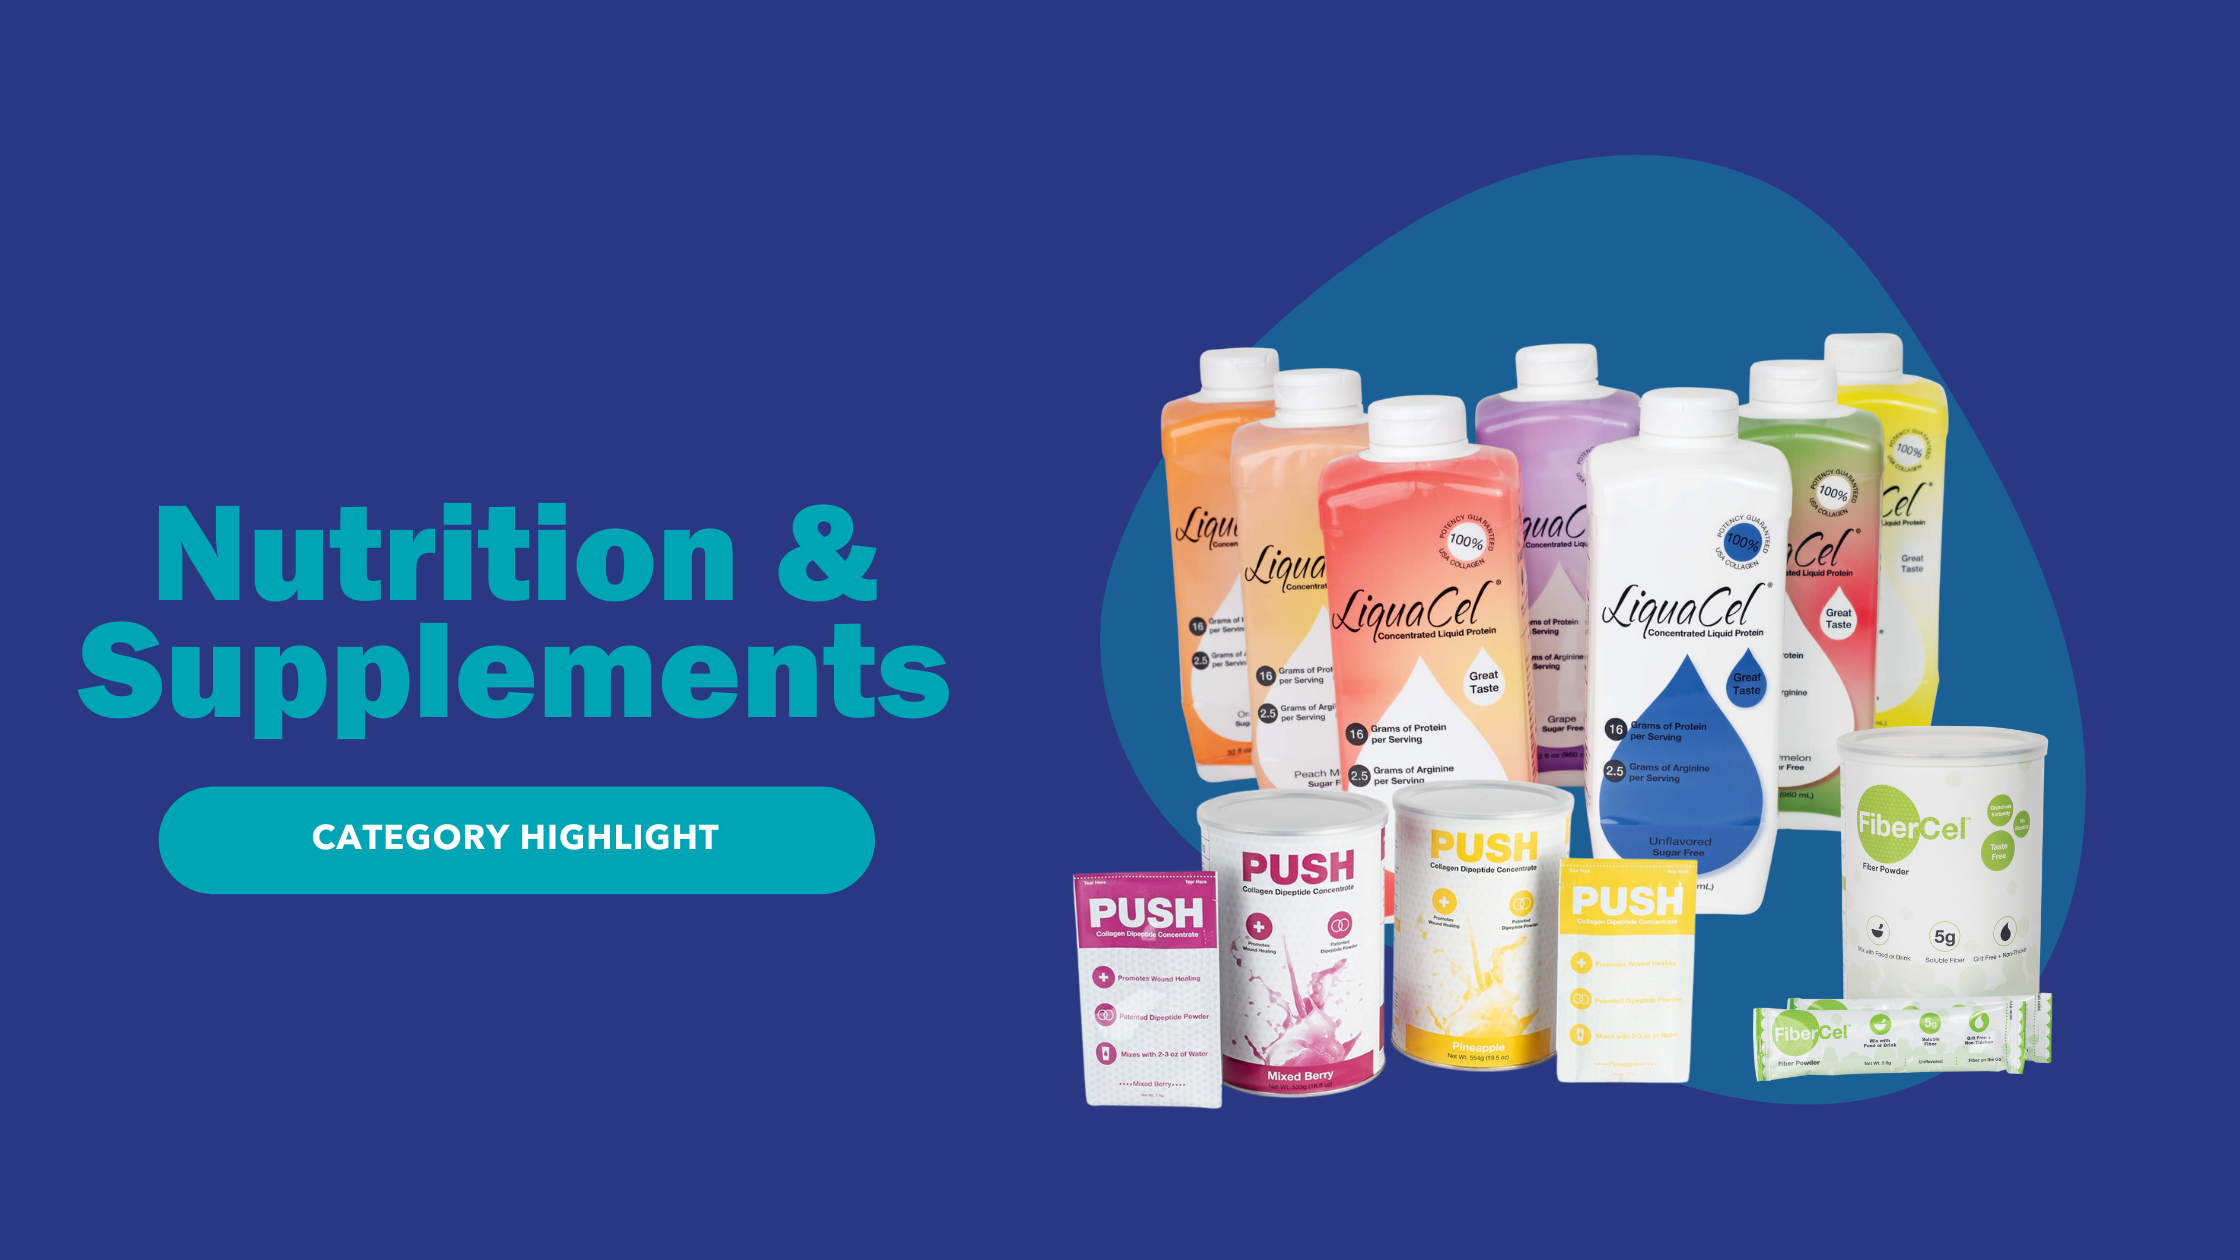 Introducing Nutrition and Supplements featuring Global Health Products!